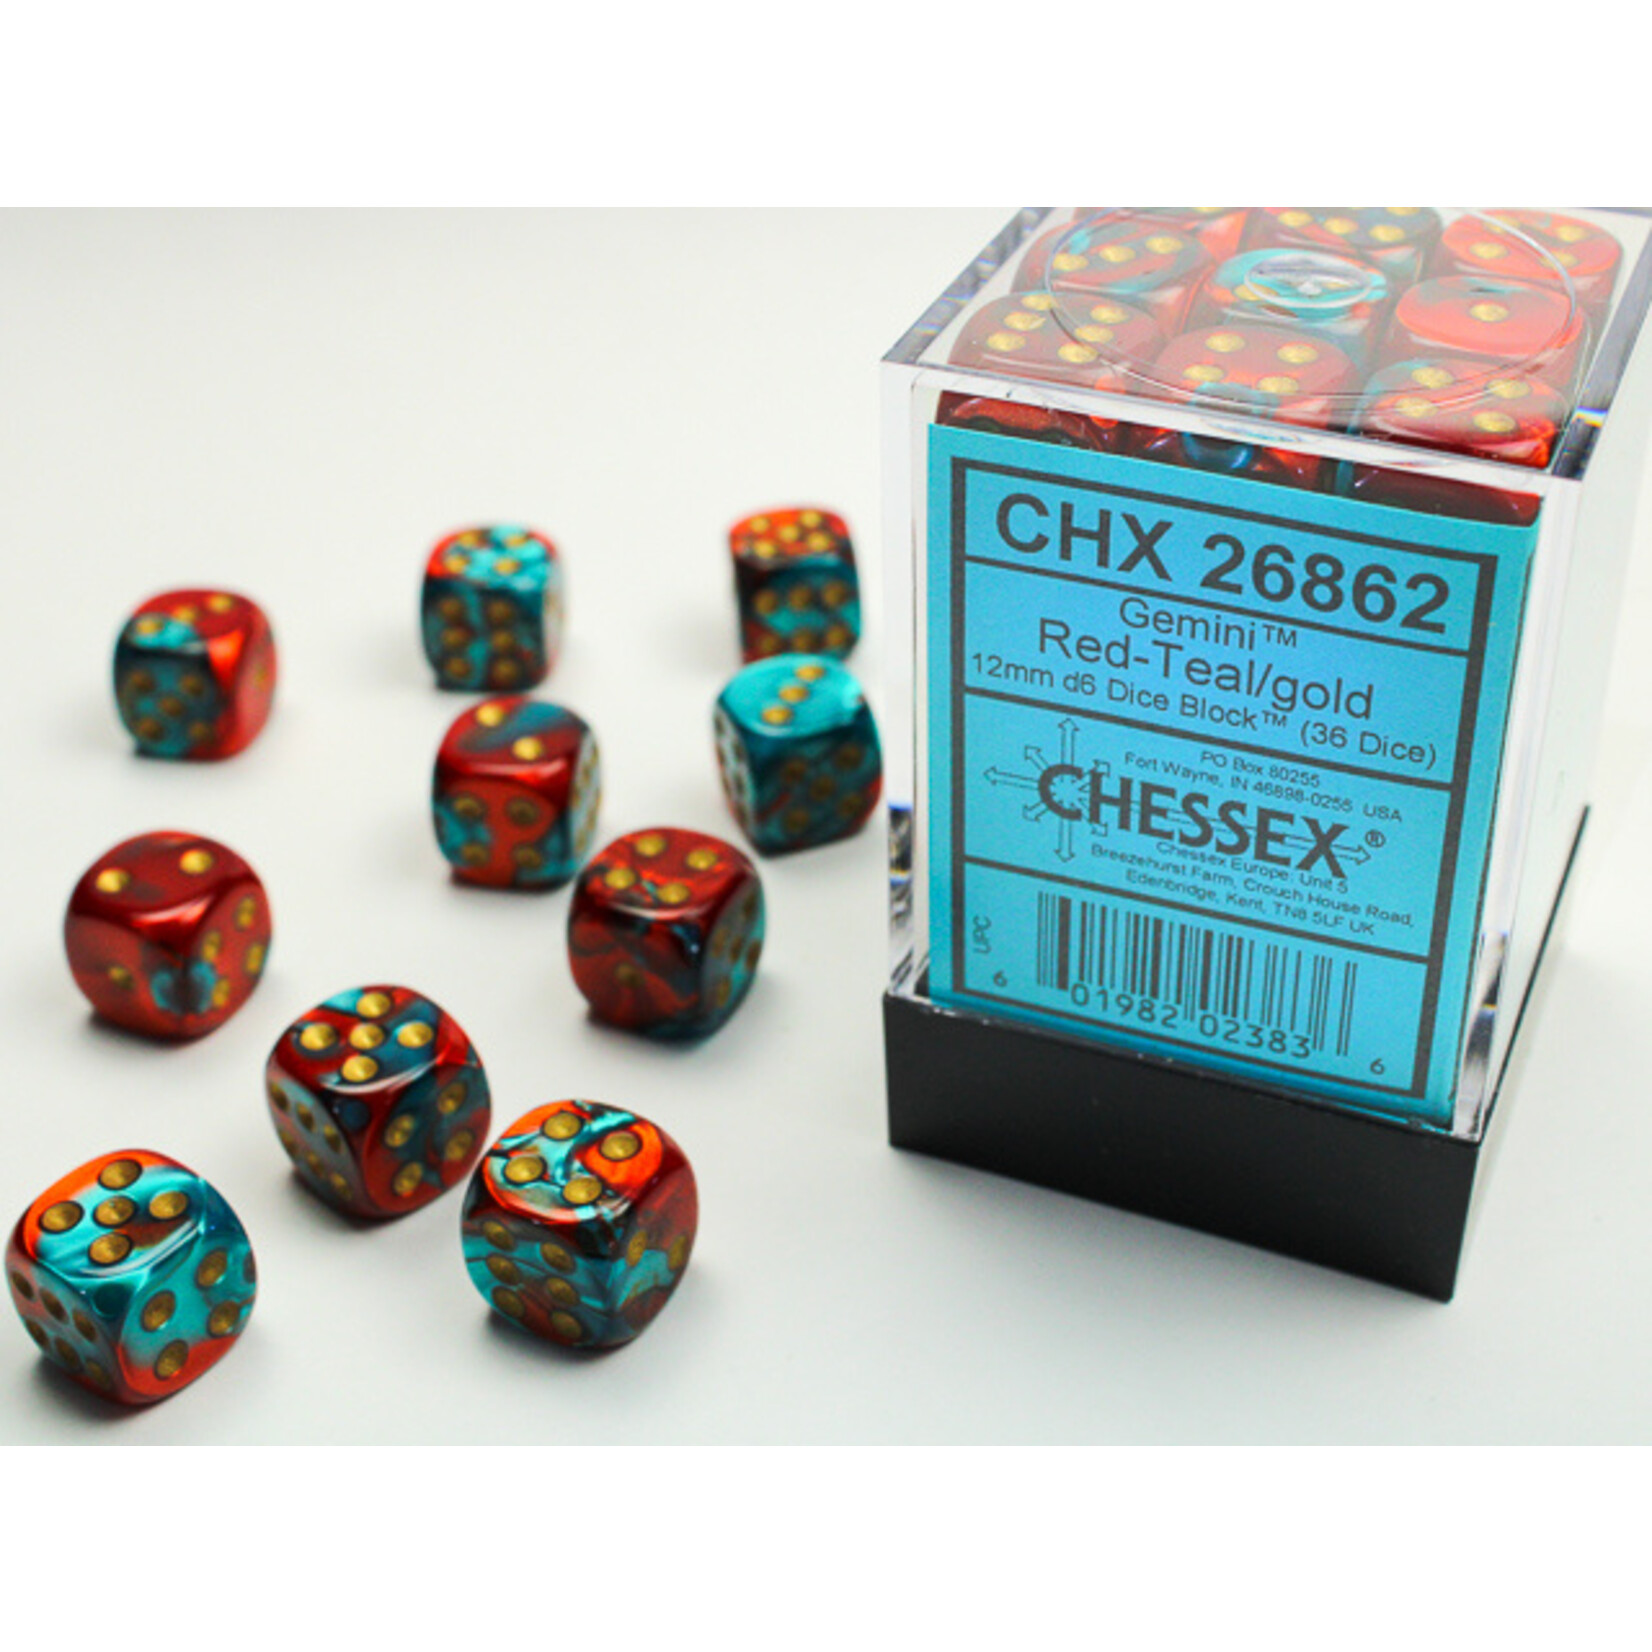 Chessex Chessex 36 x D6 Set Gemini 12mm - Red-Teal/Gold